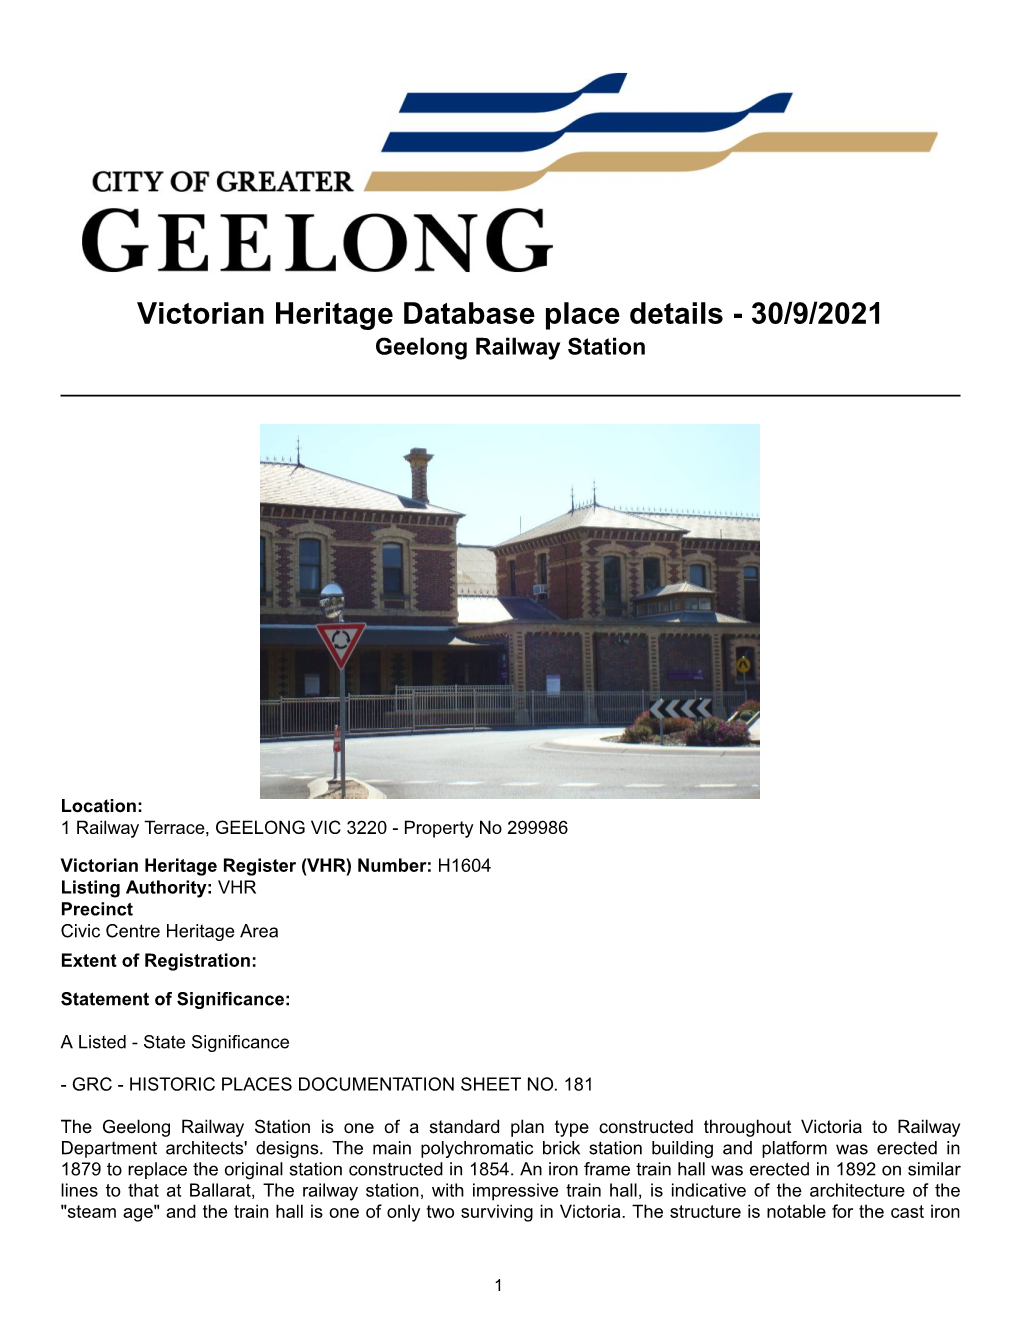 Victorian Heritage Database Place Details - 30/9/2021 Geelong Railway Station